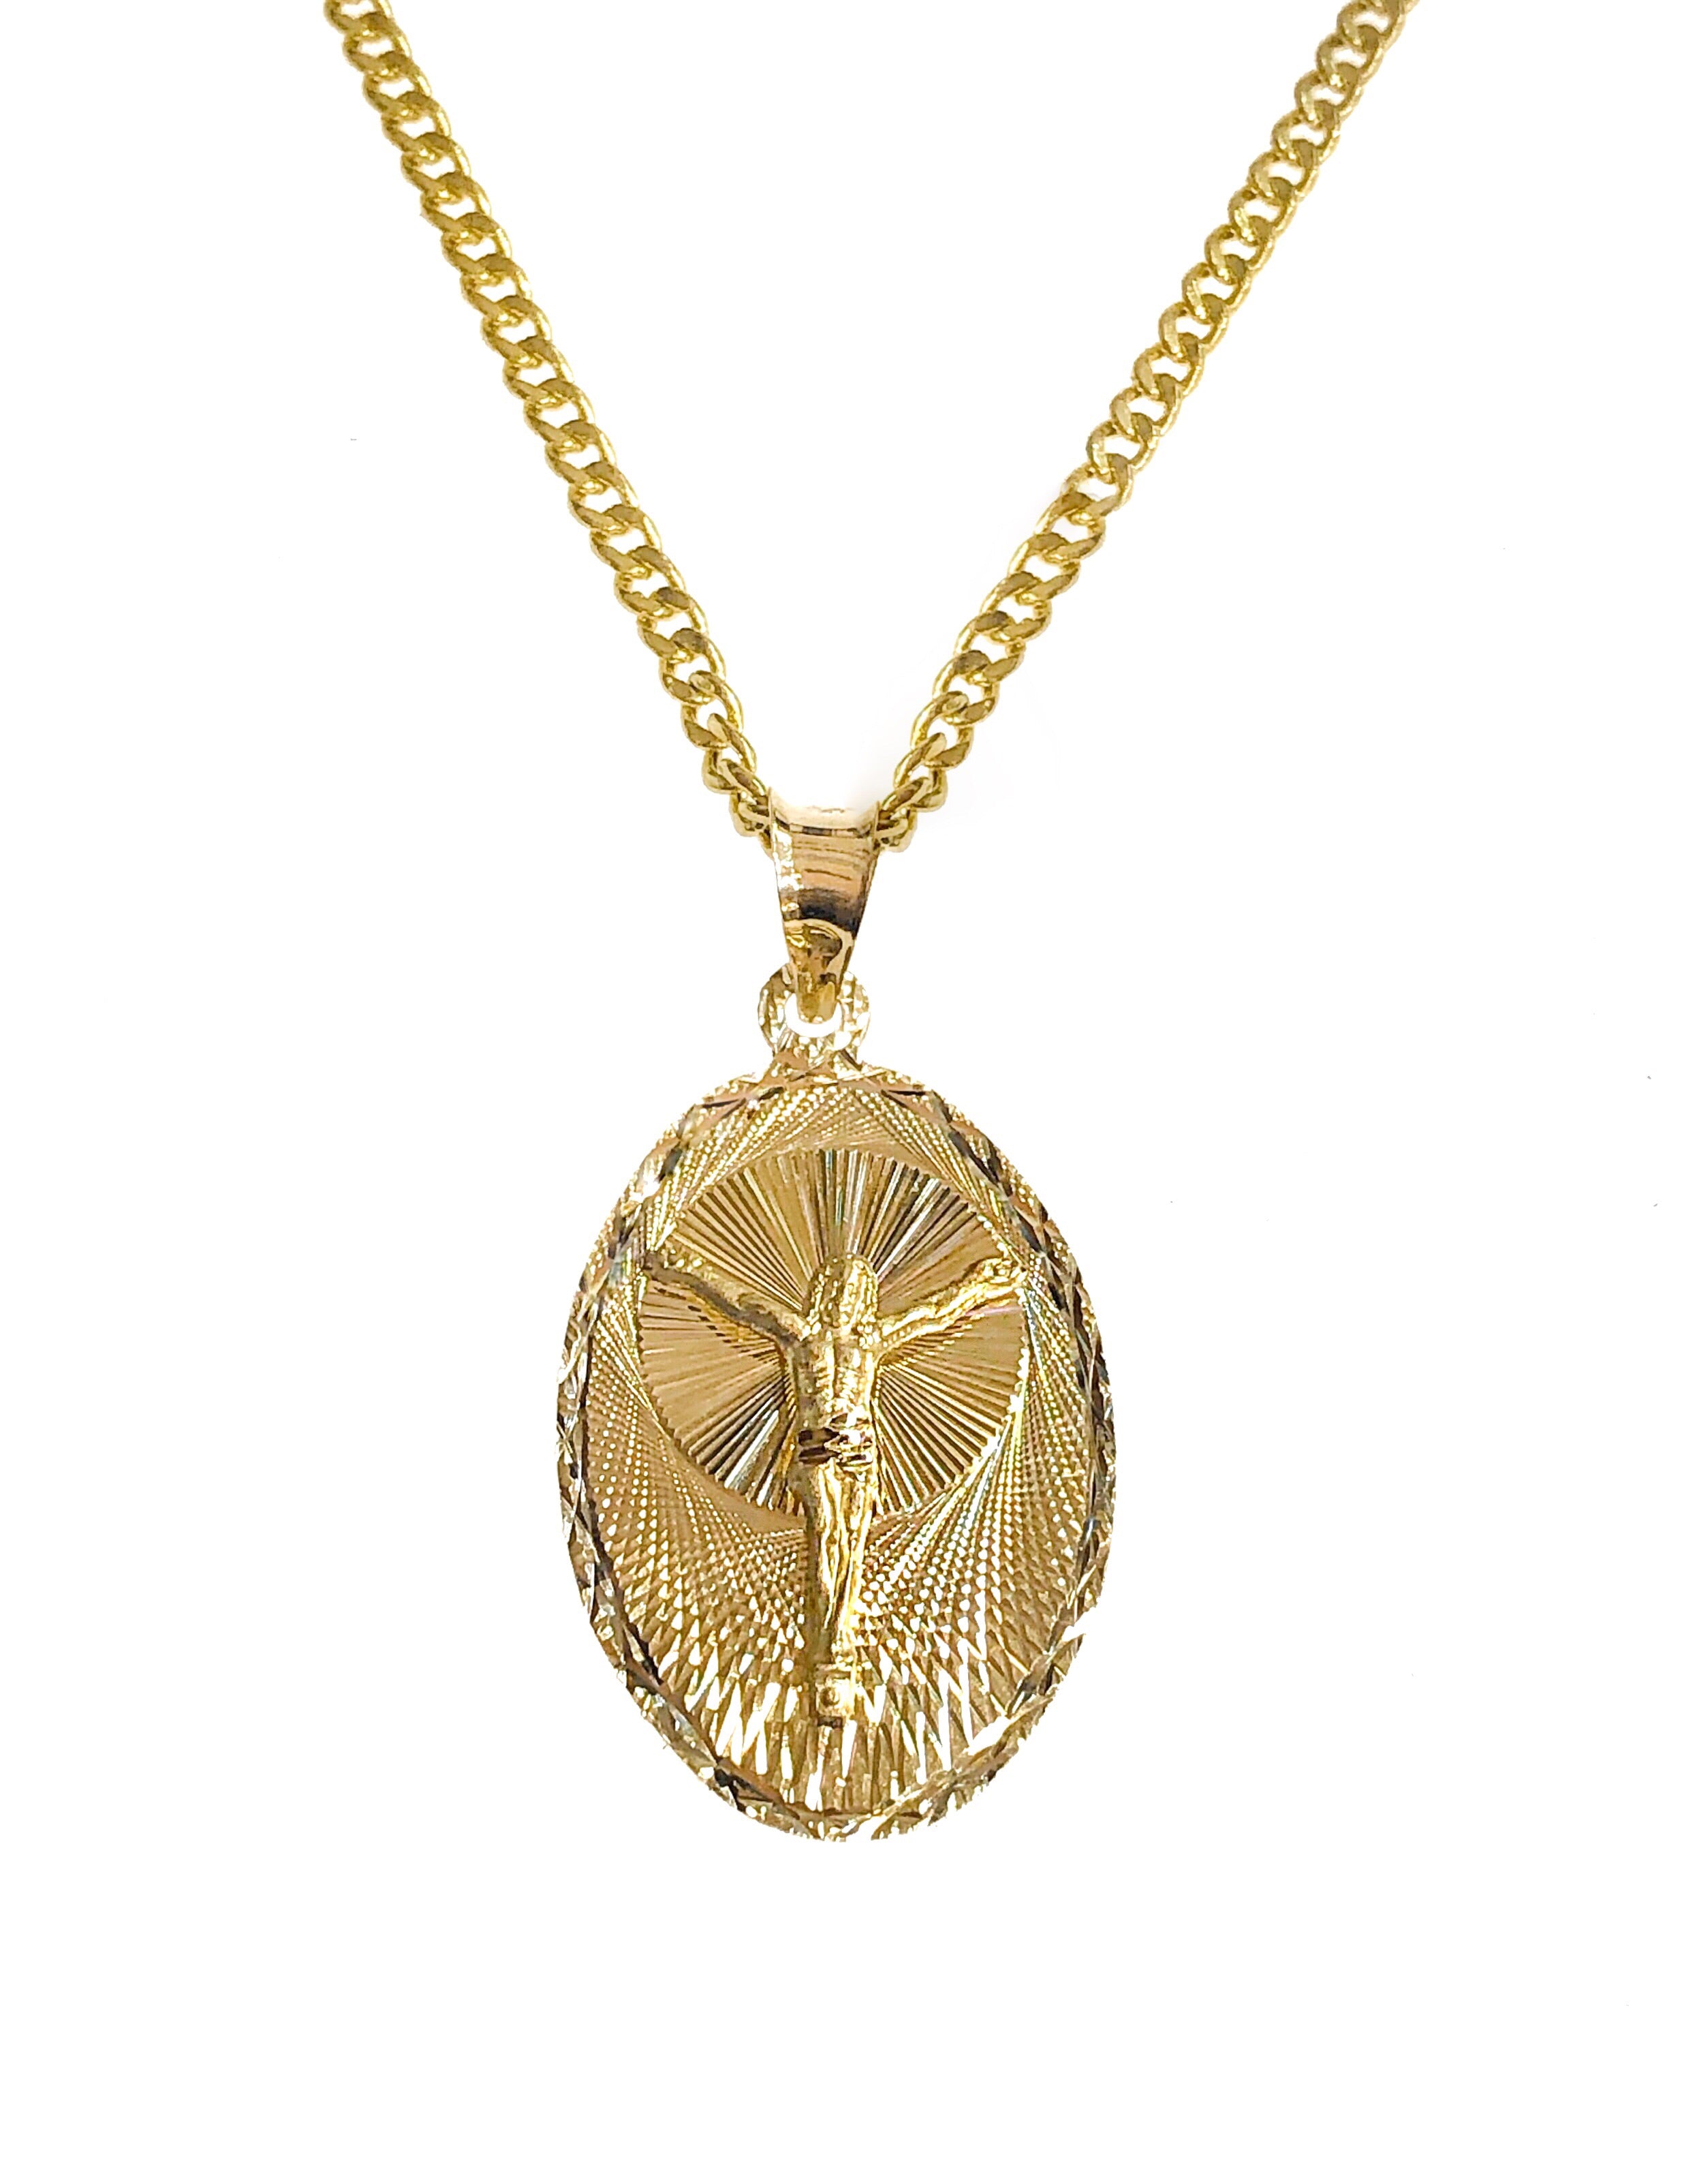 12871 - Silver (925) gold-plated pendant Jesus Christ / Scapular Mary - -  Silver Jewelry - Religious pendants without stones - Jewelry Wholesale  On-line Sentiell